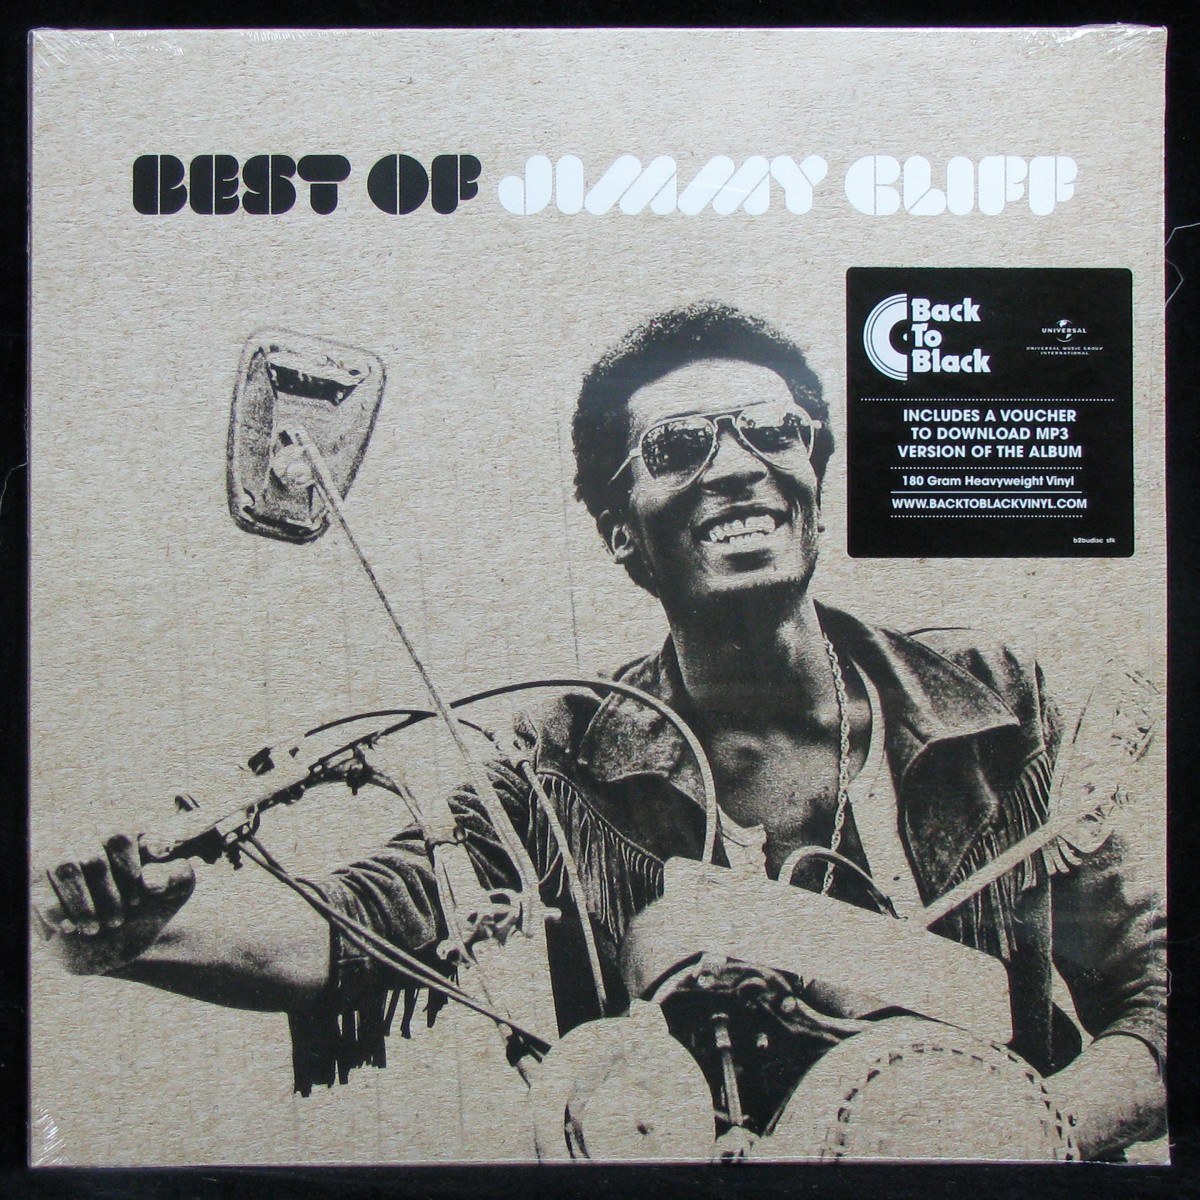 Best Of Jimmy Cliff